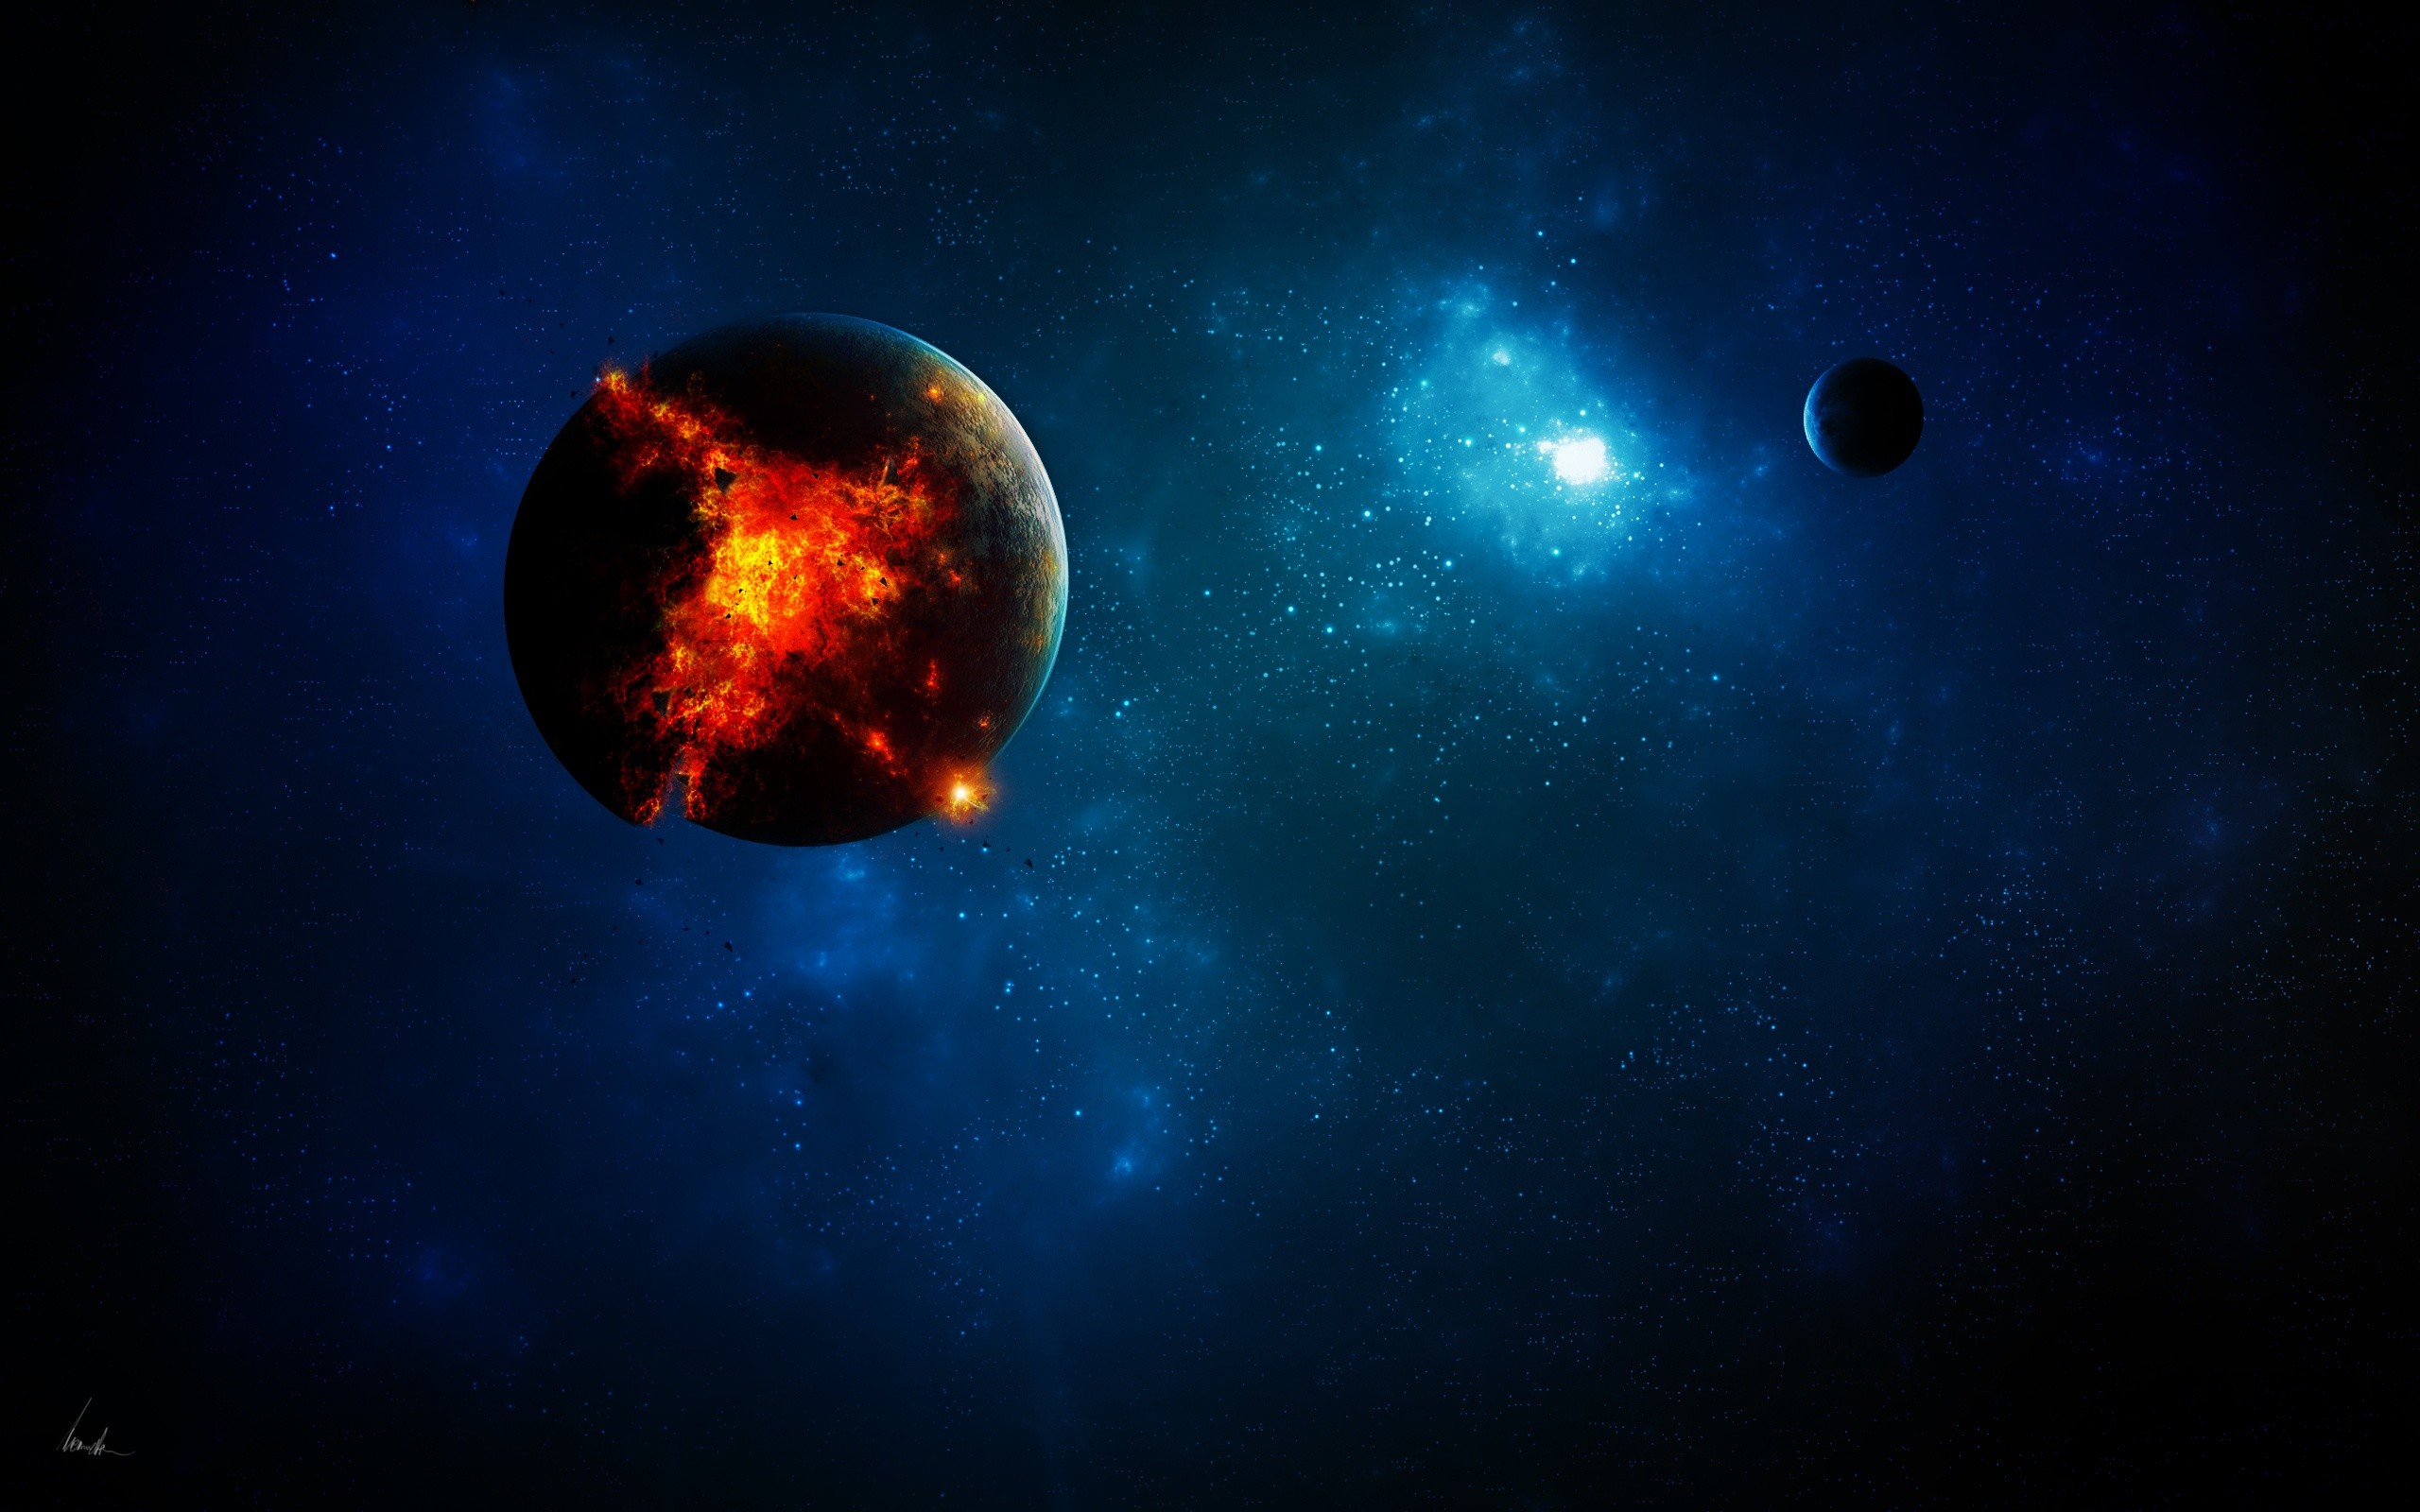 General 2560x1600 space planet explosion apocalyptic space art digital art